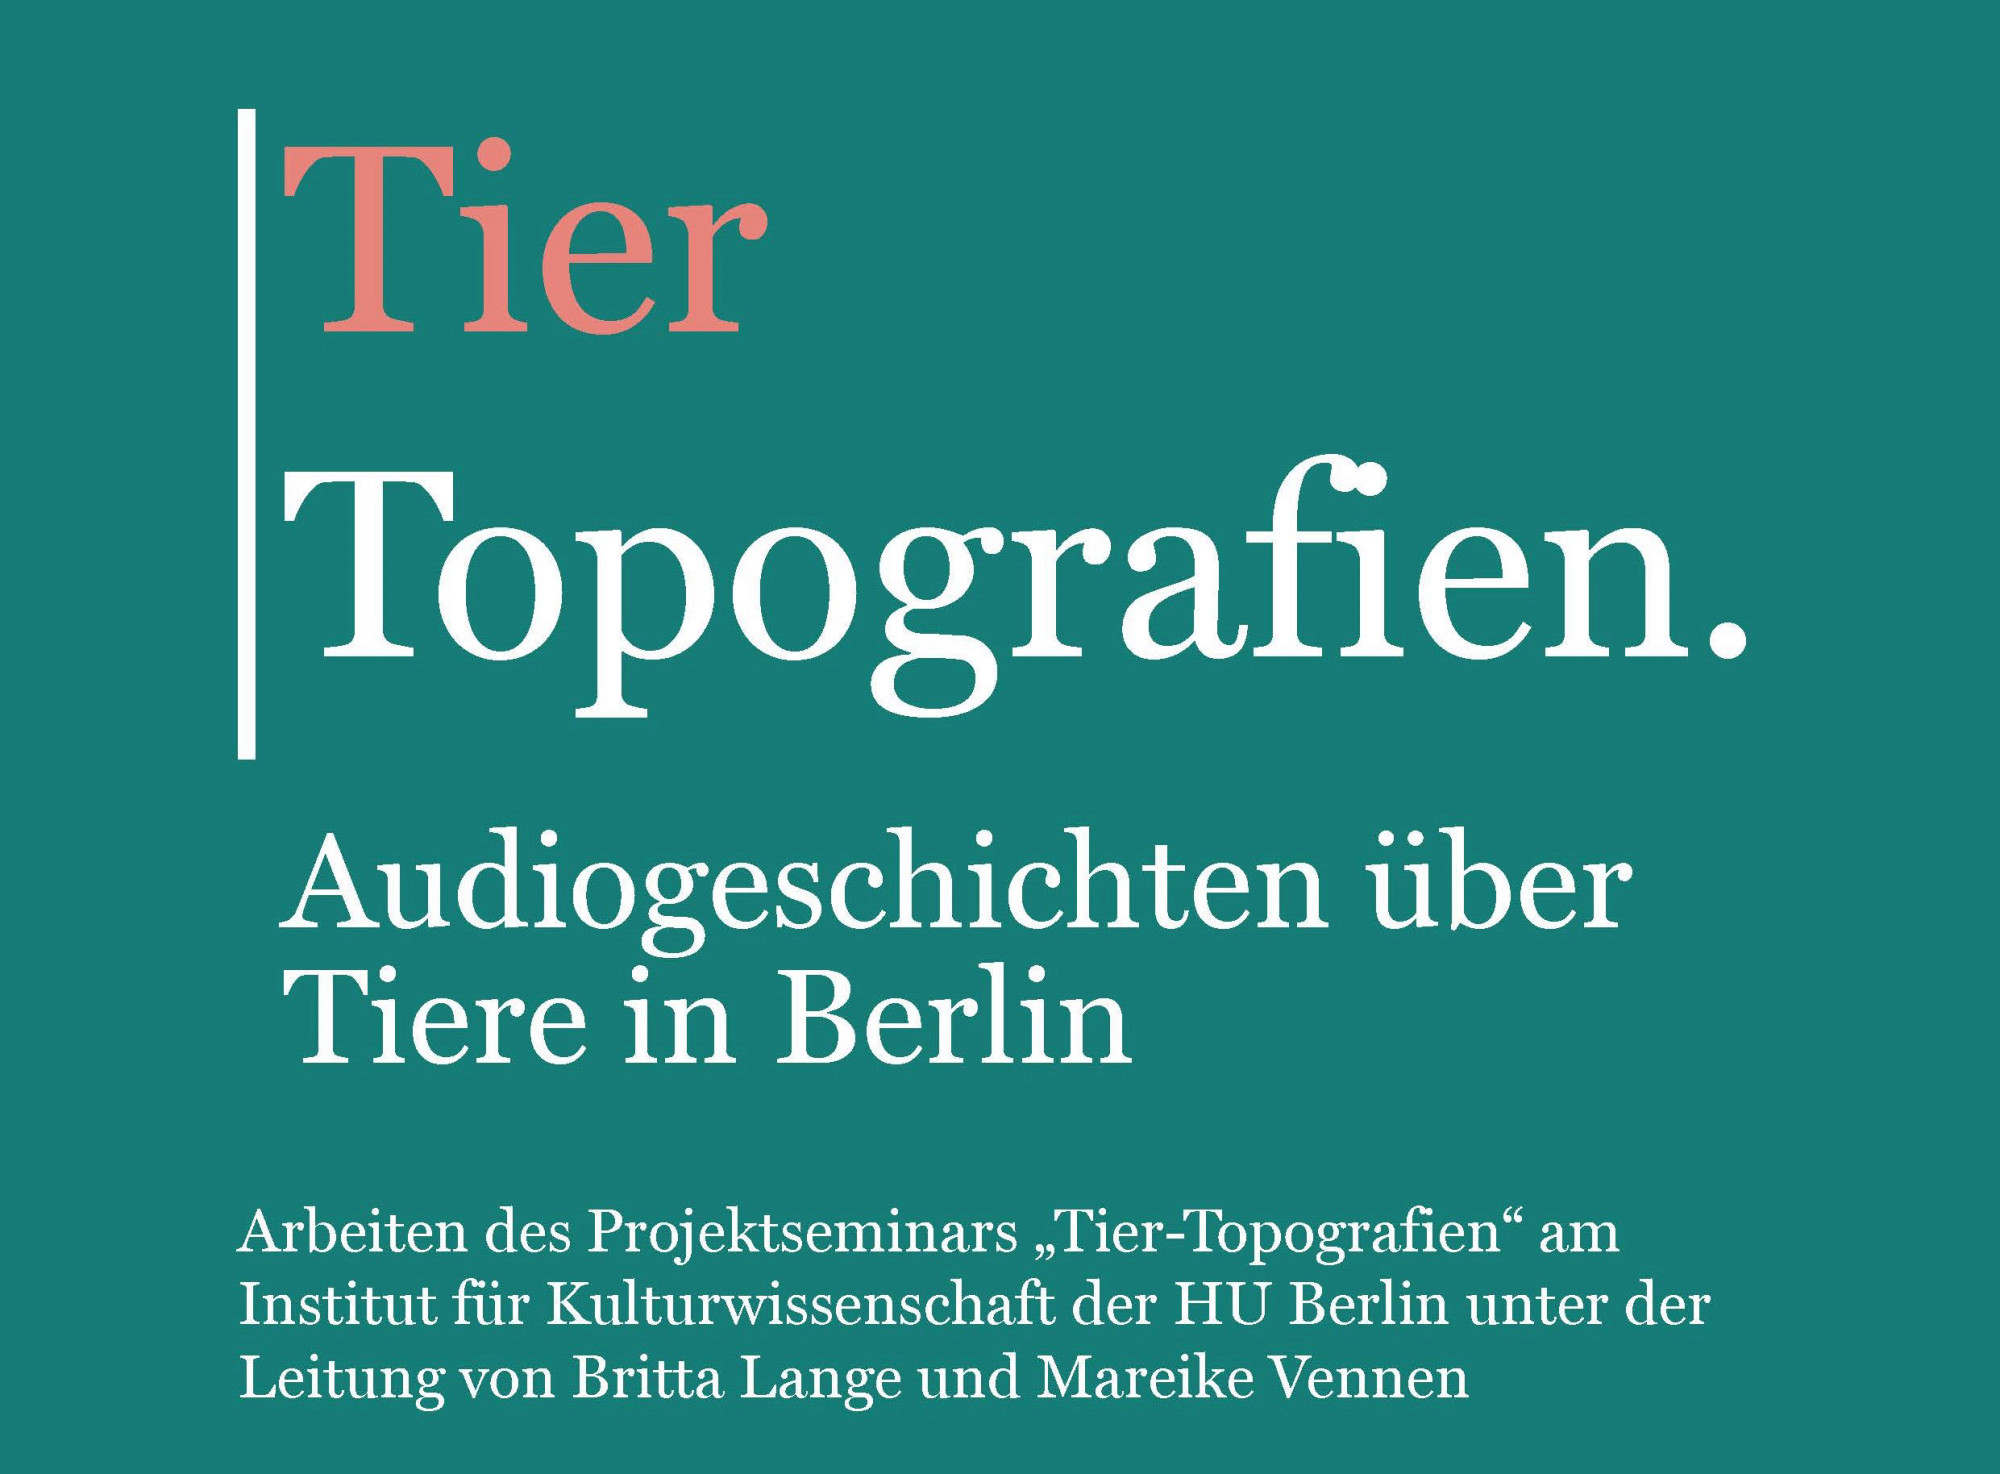 Green poster with colored writing: "Animal Topographies. Audio stories about animals in Berlin". Beneath: “Held at the Institute for Cultural Studies at Humboldt-Universität zu Berlin and run by Britta Lange and Mareike Vennen.